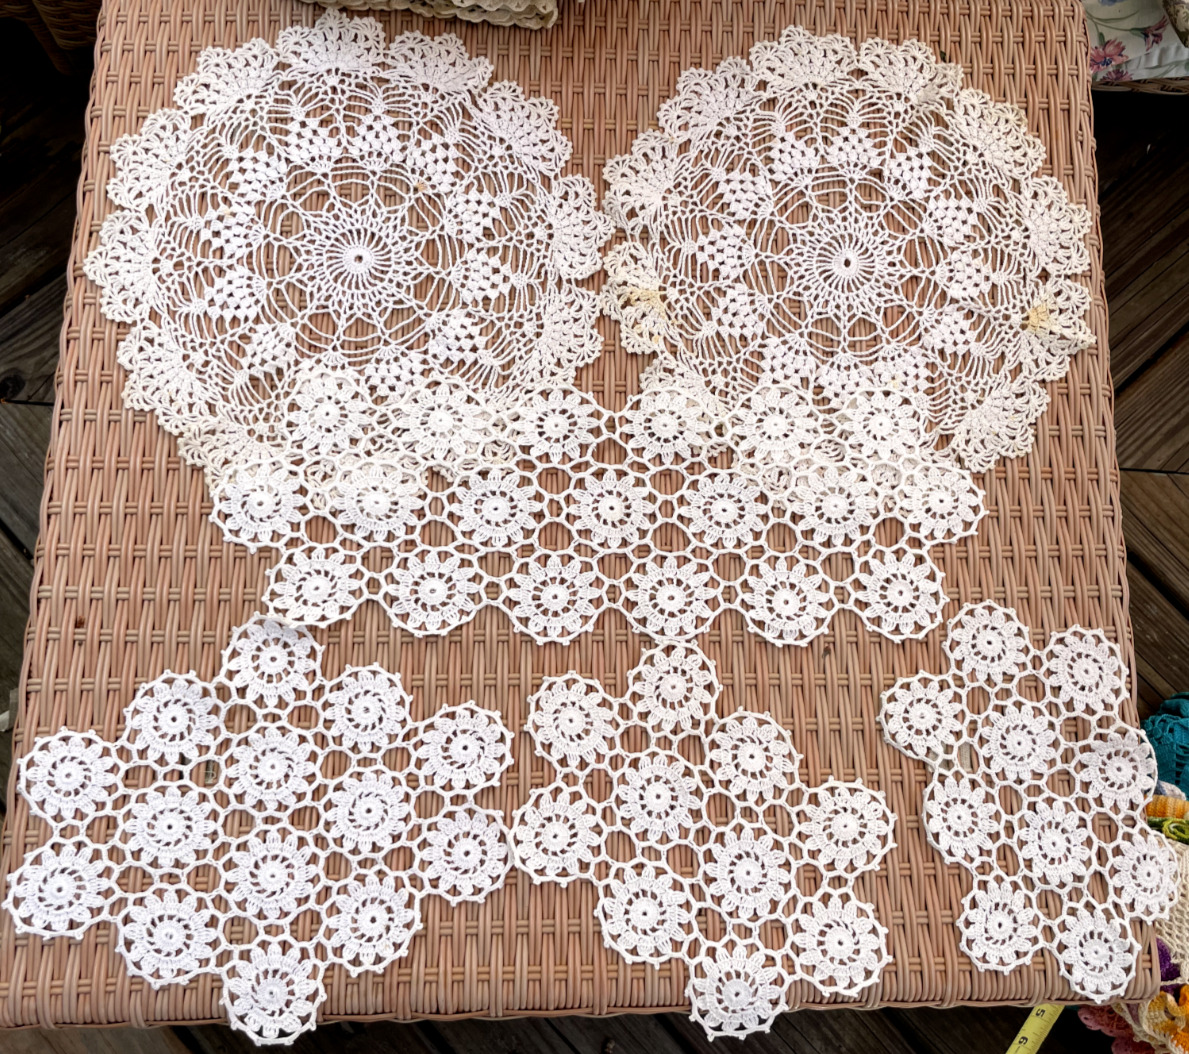 Vintage Lace Doily White Textured Hand Crocheted Lot of 6